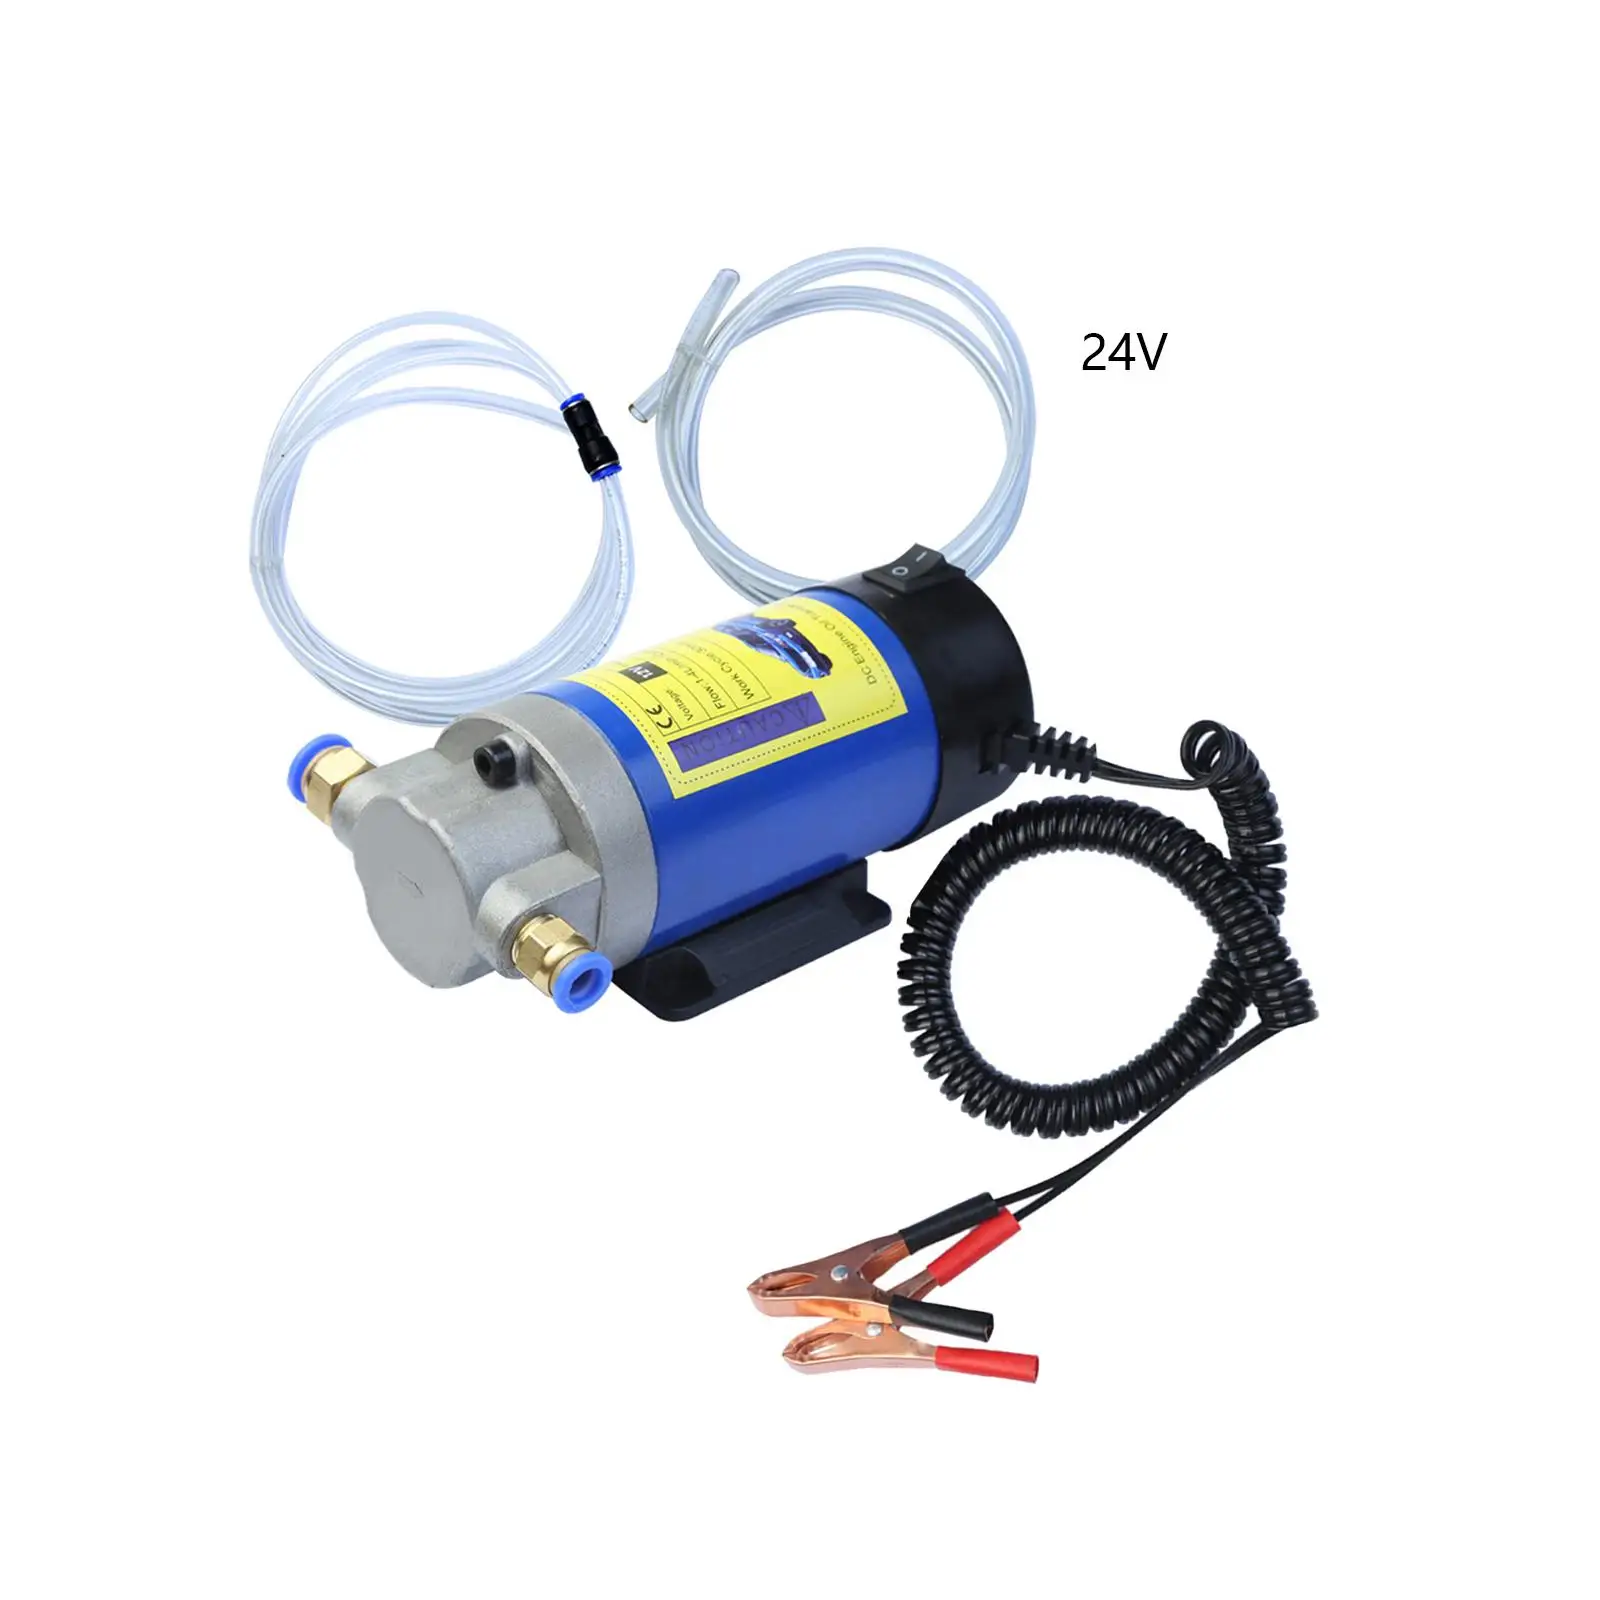 Oil Change Pump Extractor Marine with Clamps with Tubes Suction Transfer Pump Engine Fluid Pump Scavenge for RV Truck Motor